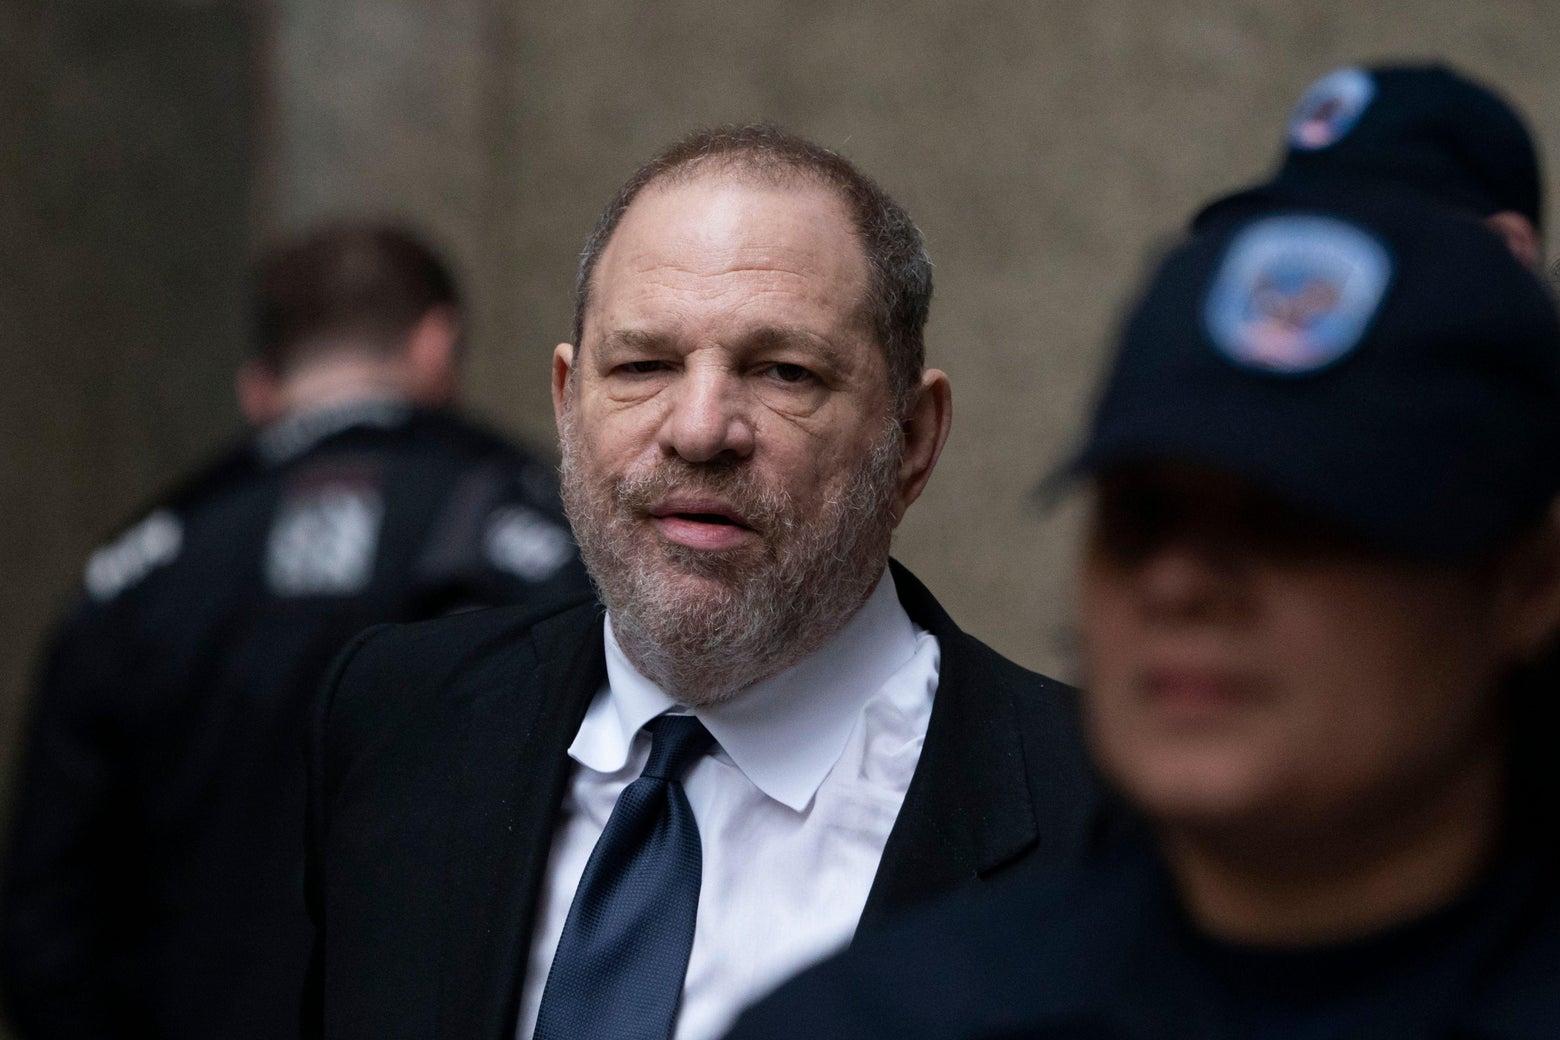 Harvey Weinstein reaches tentative settlement with victims and creditors.